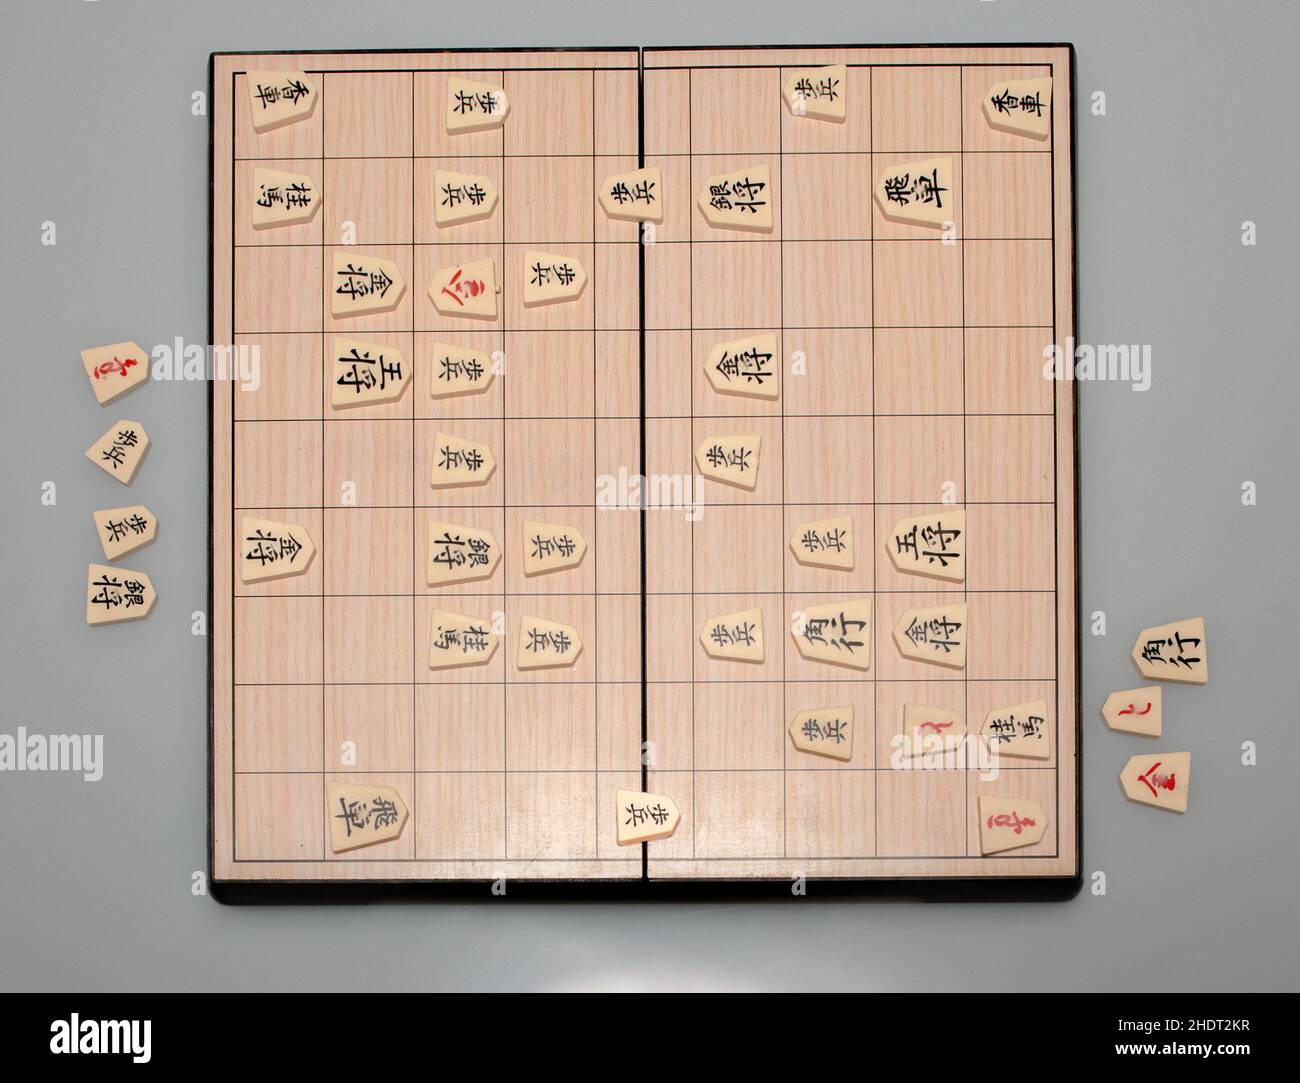 Shogi  a sort of  Japanese chess or the Game of Generals. A two-player strategy board game. Stock Photo